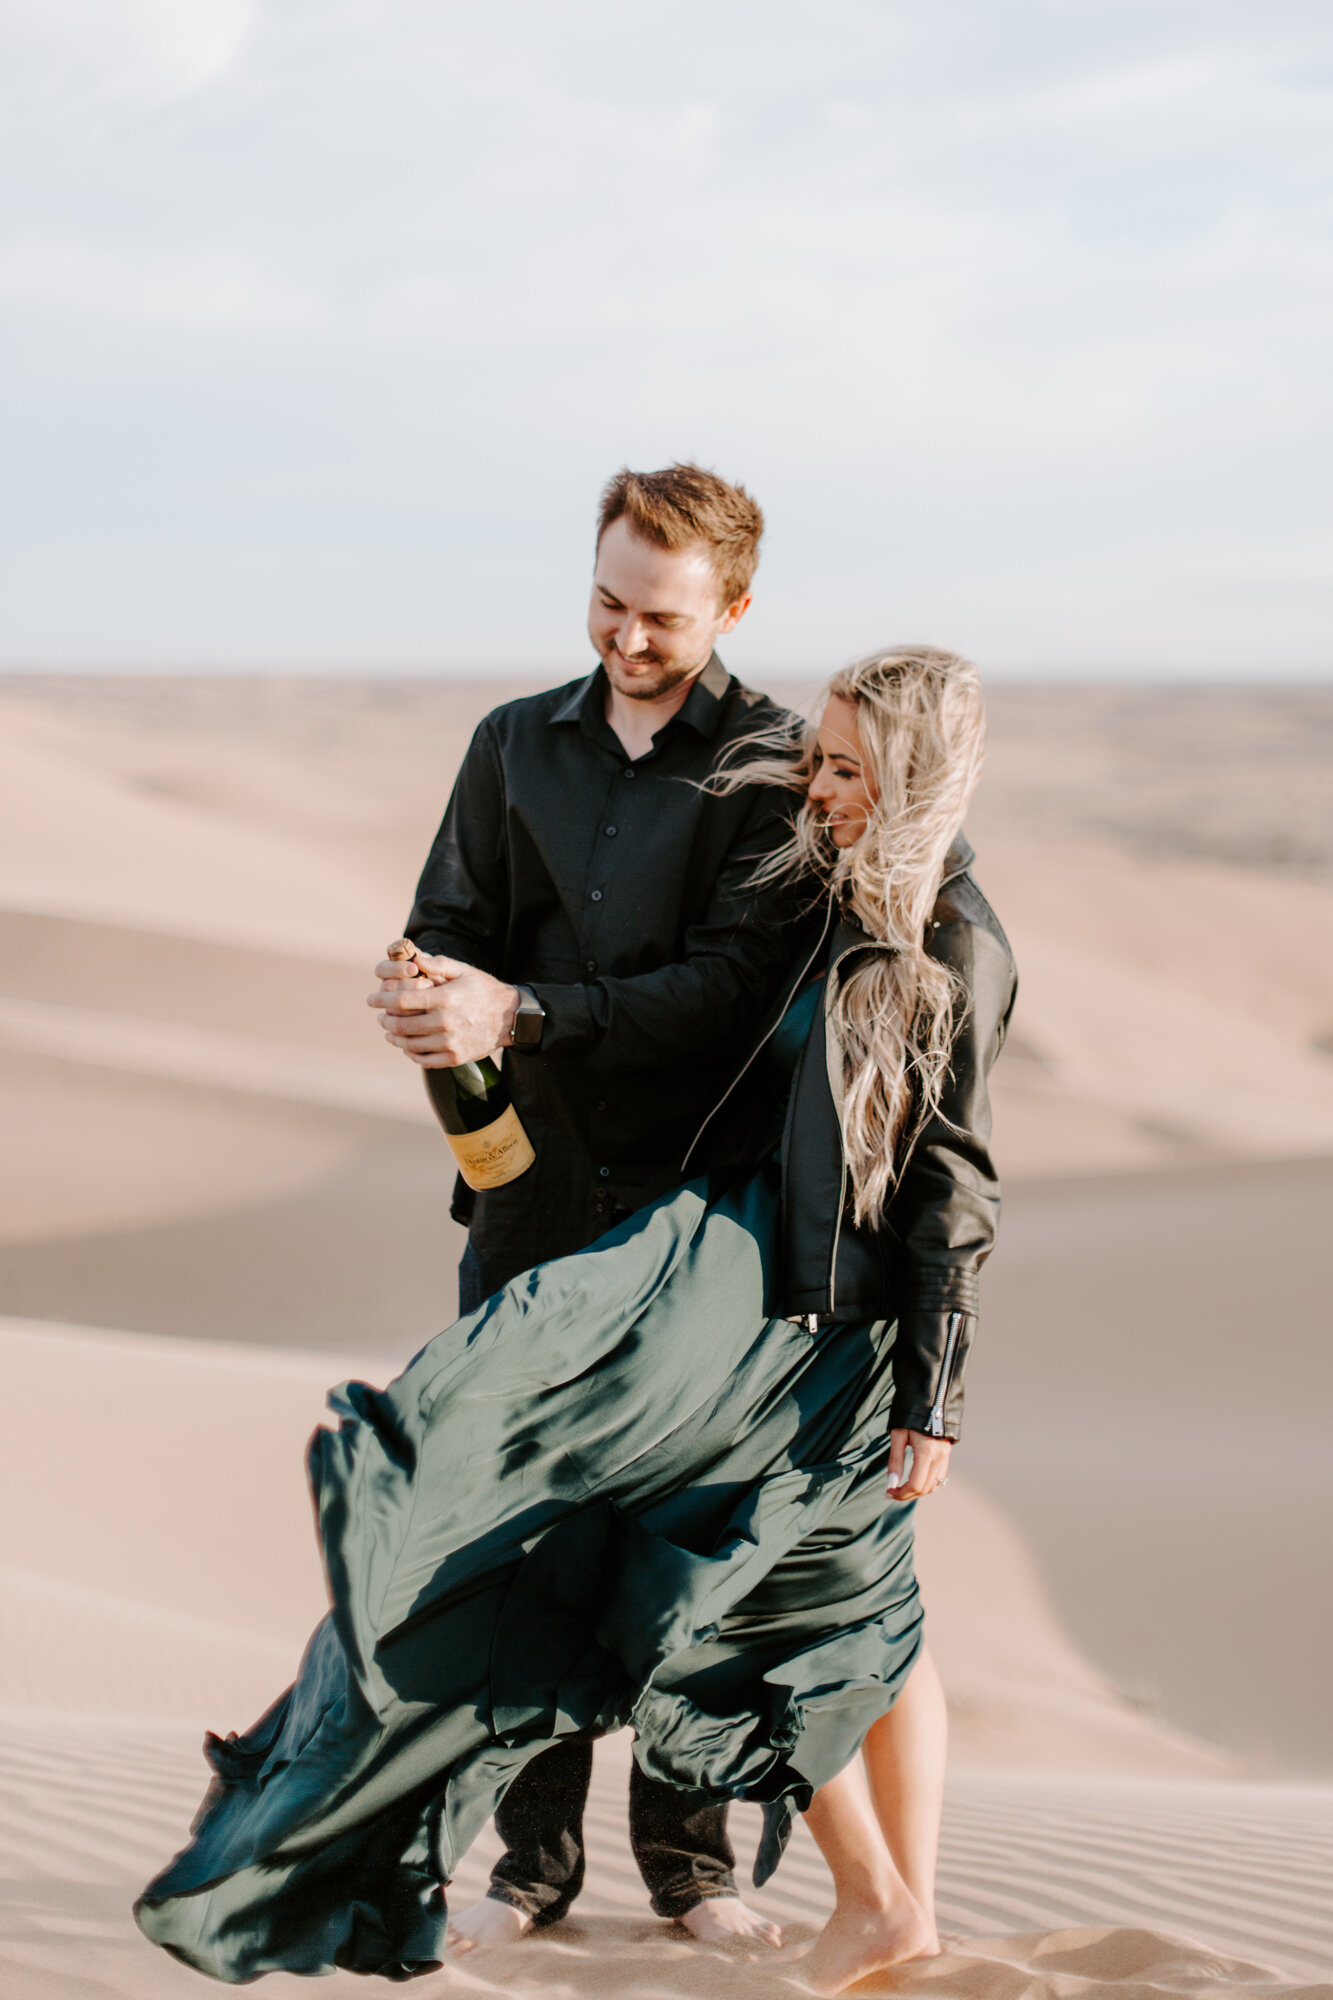 Engagement photos done at Imperial Sand Dunes also known as the Glamis Sand Dunes in california, Imperial sand dunes, glamis sand dunes, Glamis Sand Dunes engagement, imperial sand dunes engagement